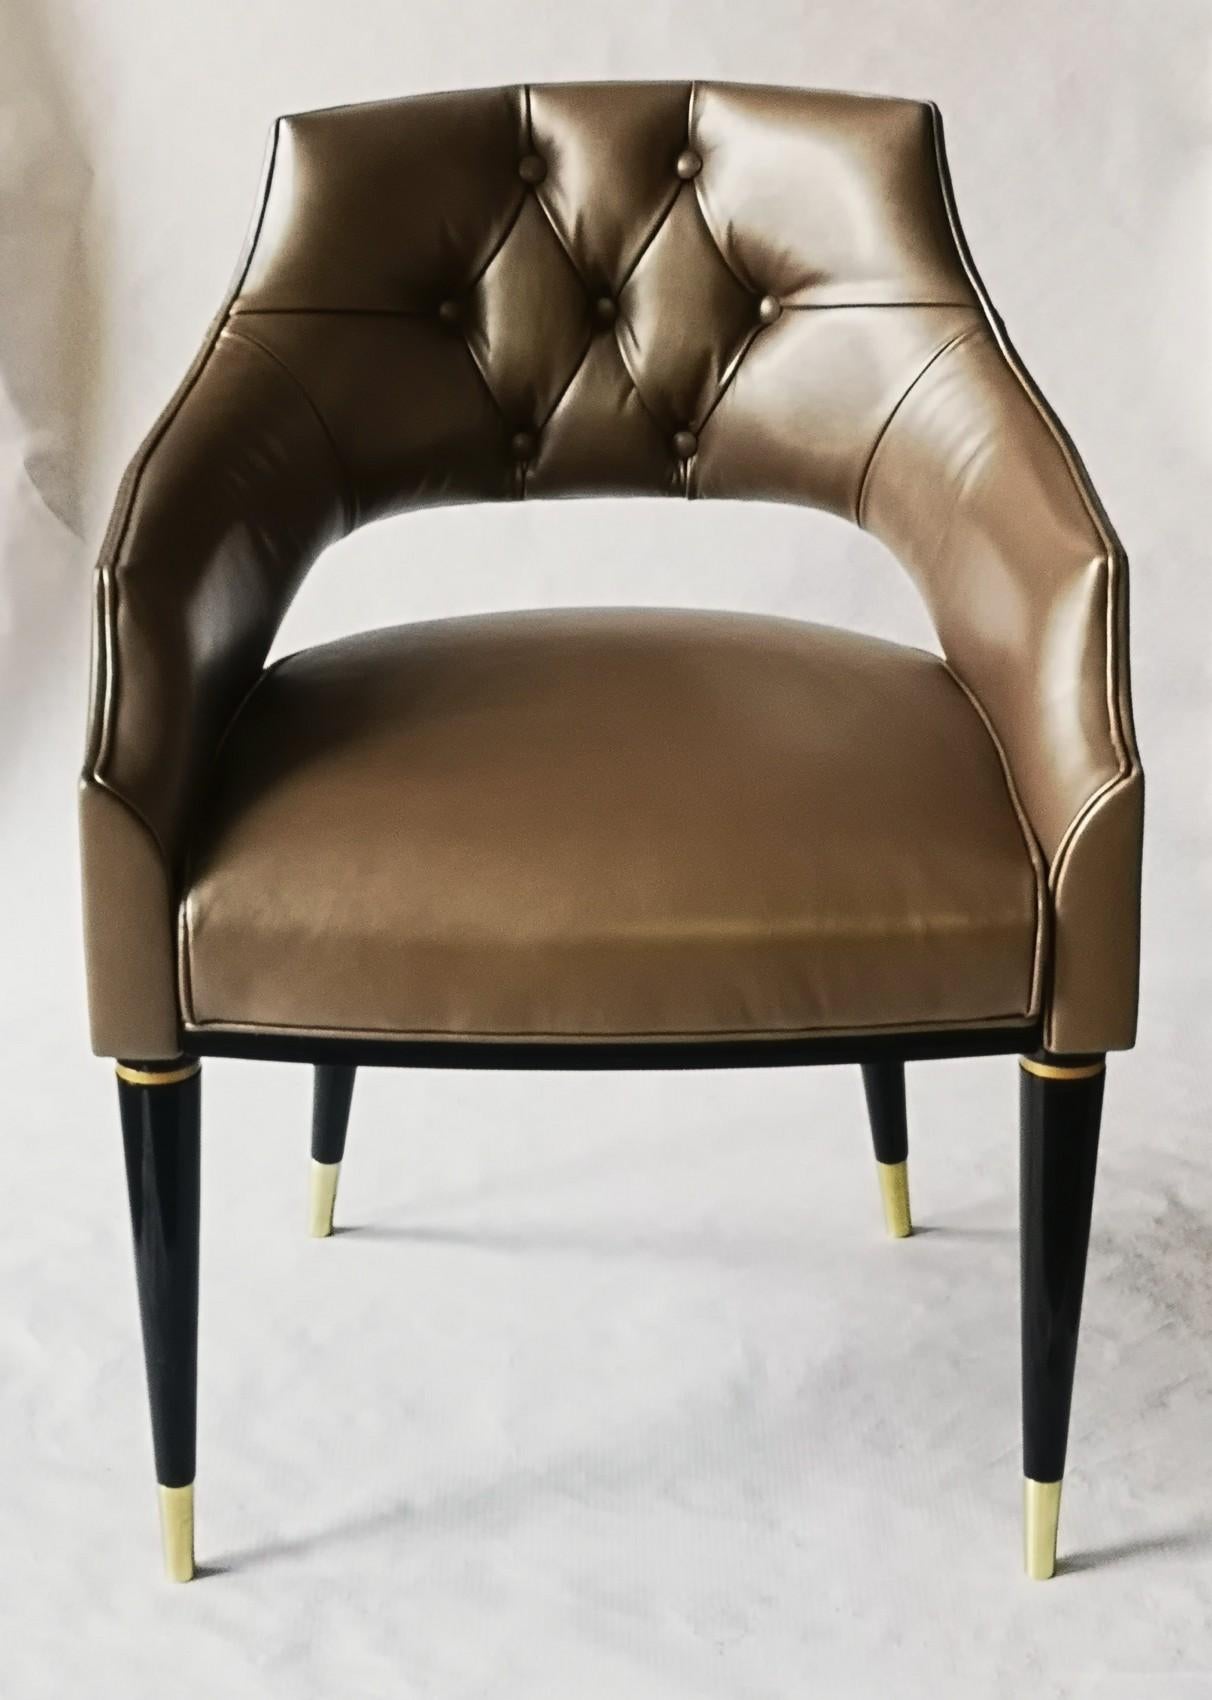 Dining Armchair, Tufted Fiore Italian Leather, Midcentury Style, Luxury Details 5